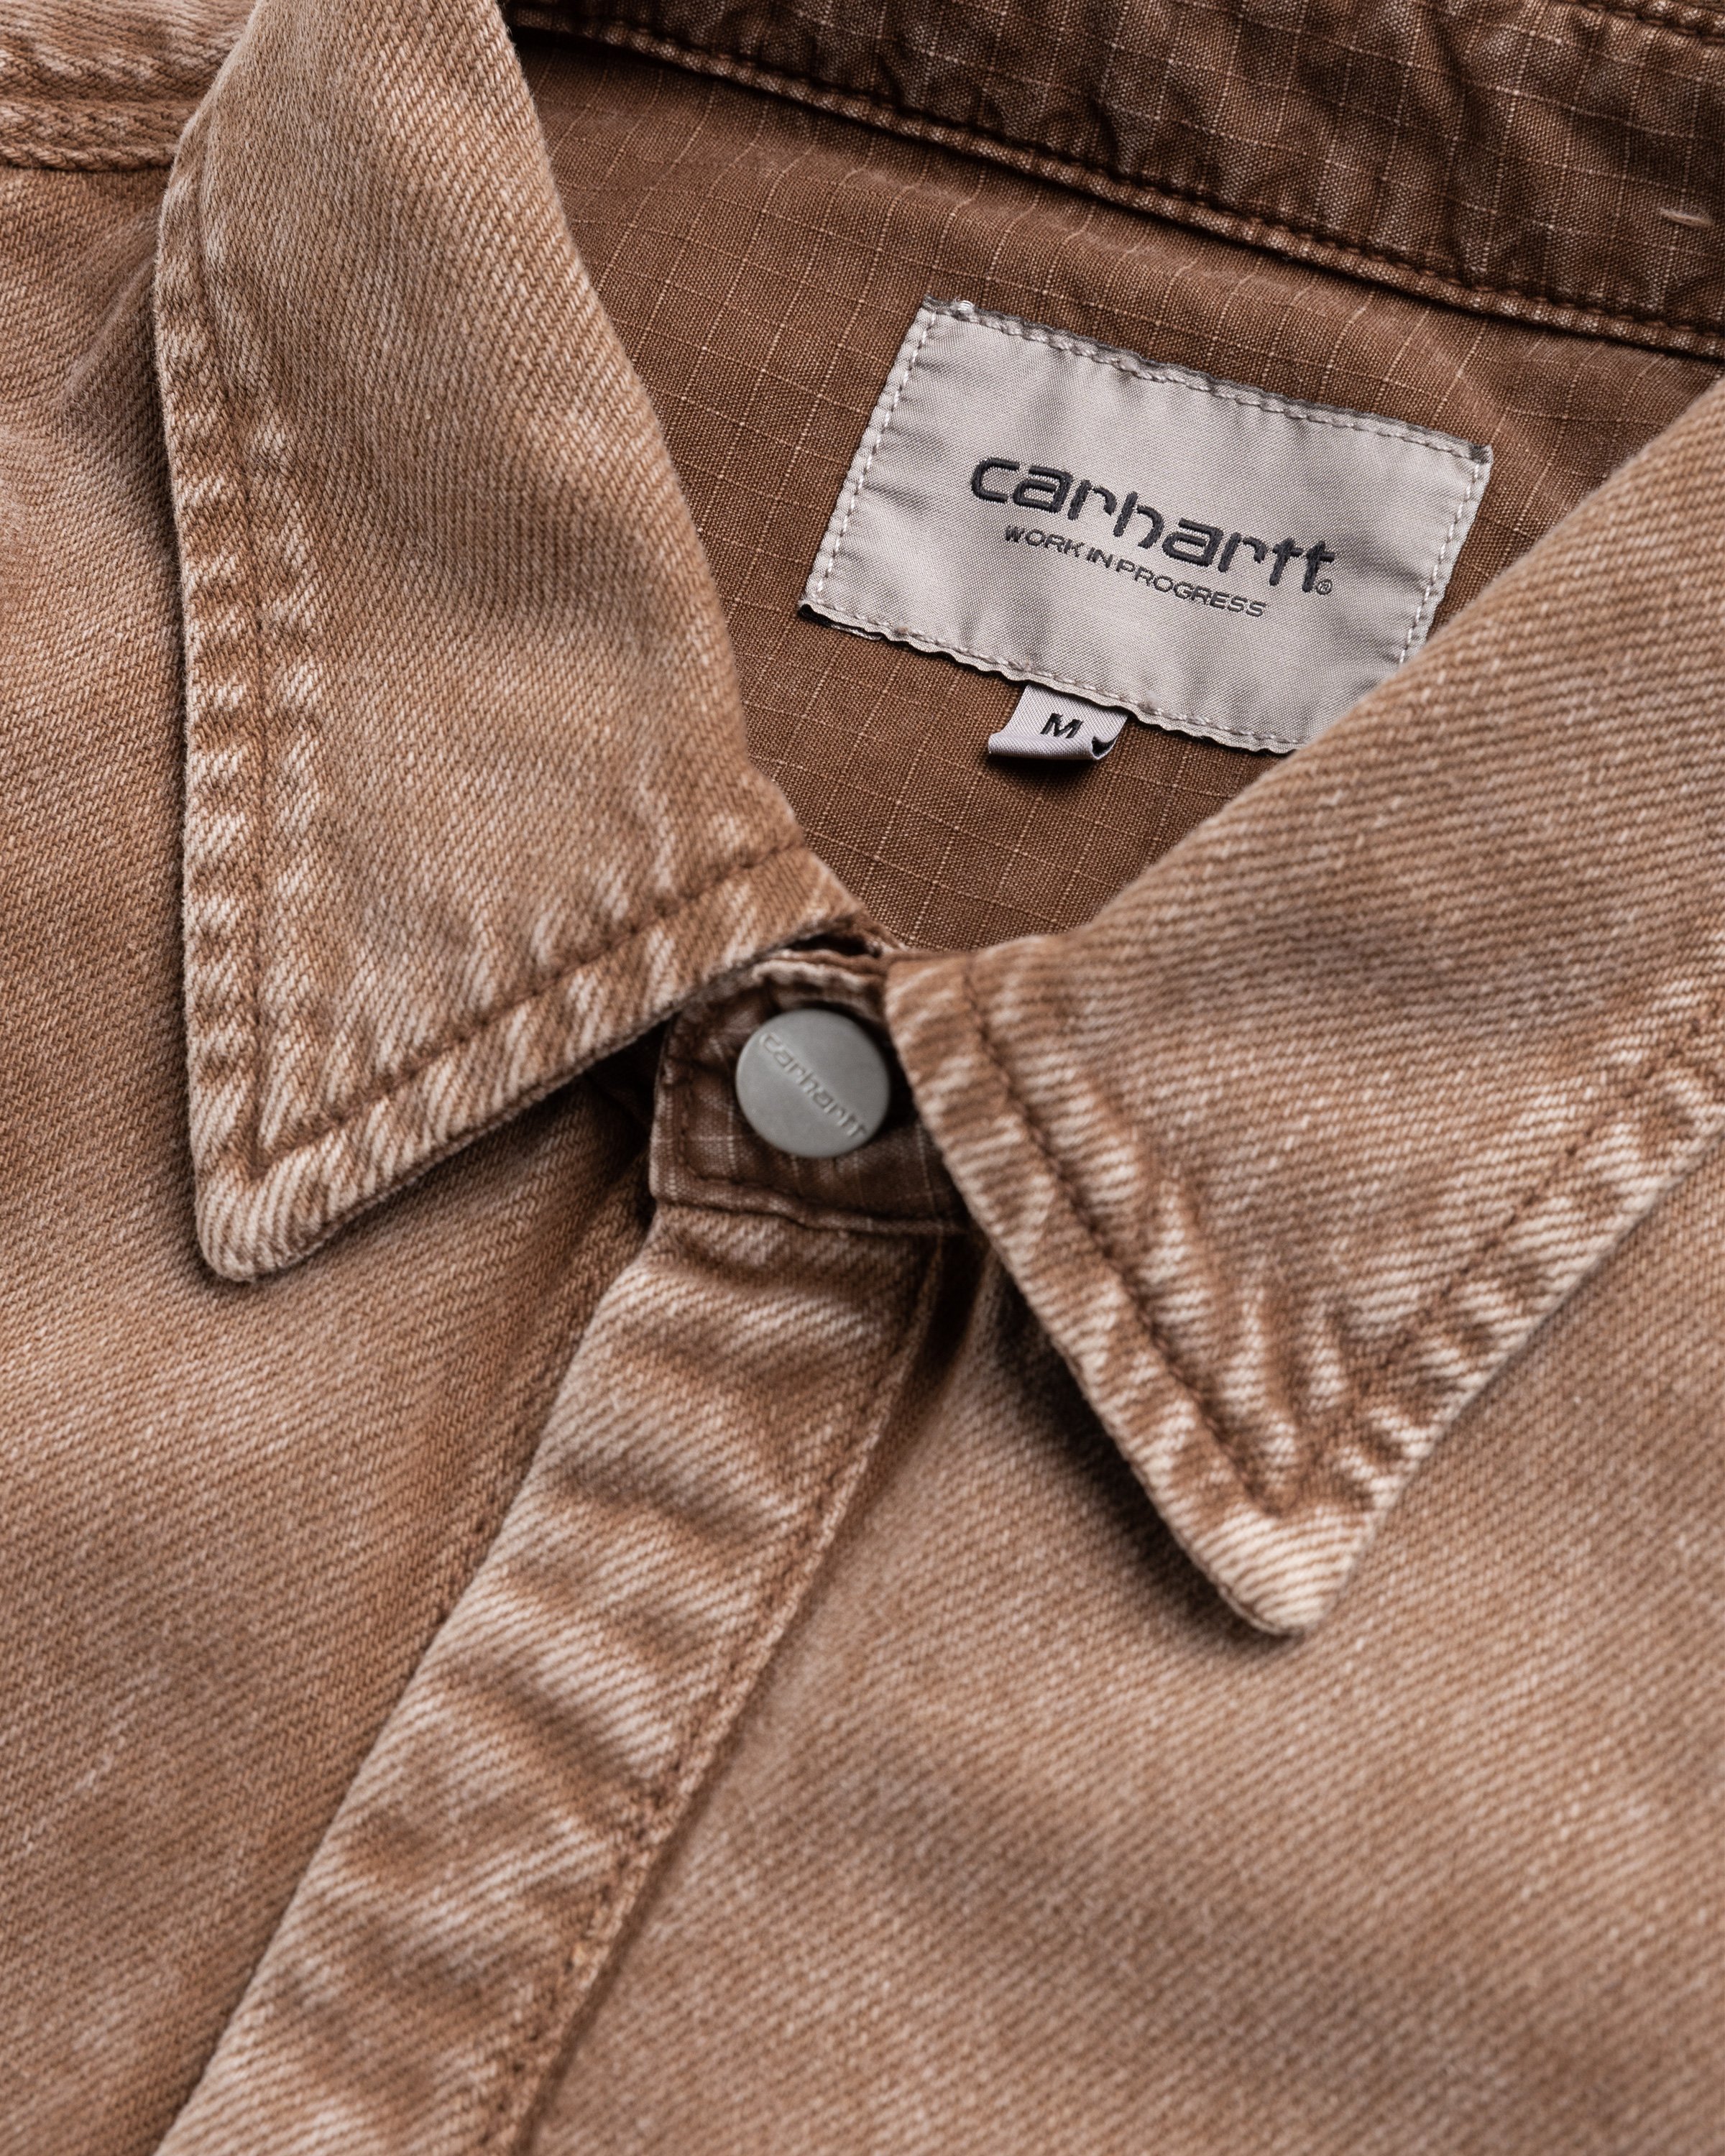 Carhartt WIP - Monterey Shirt Jacket Worn-Washed Red - Clothing - Red - Image 5